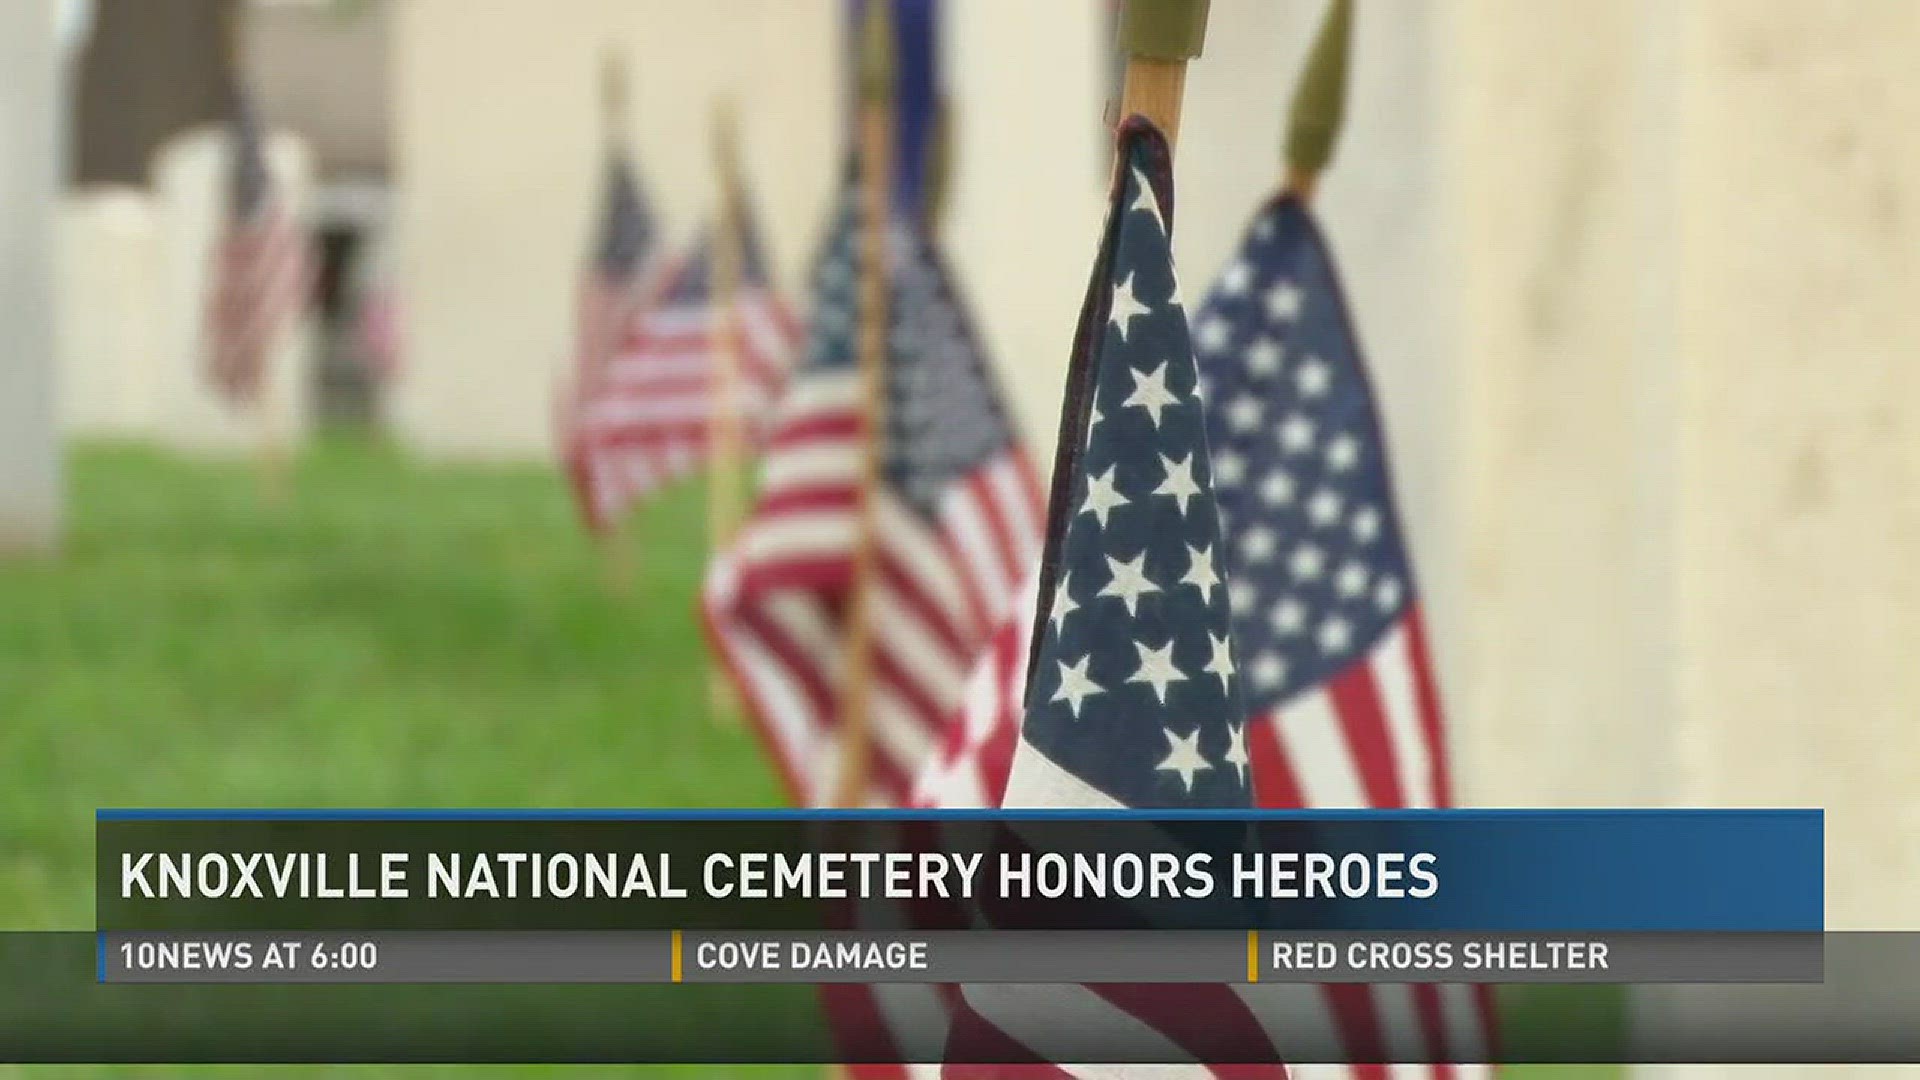 Memorial Day services at the Knoxville National Cemetery featured Civil War reenactors/